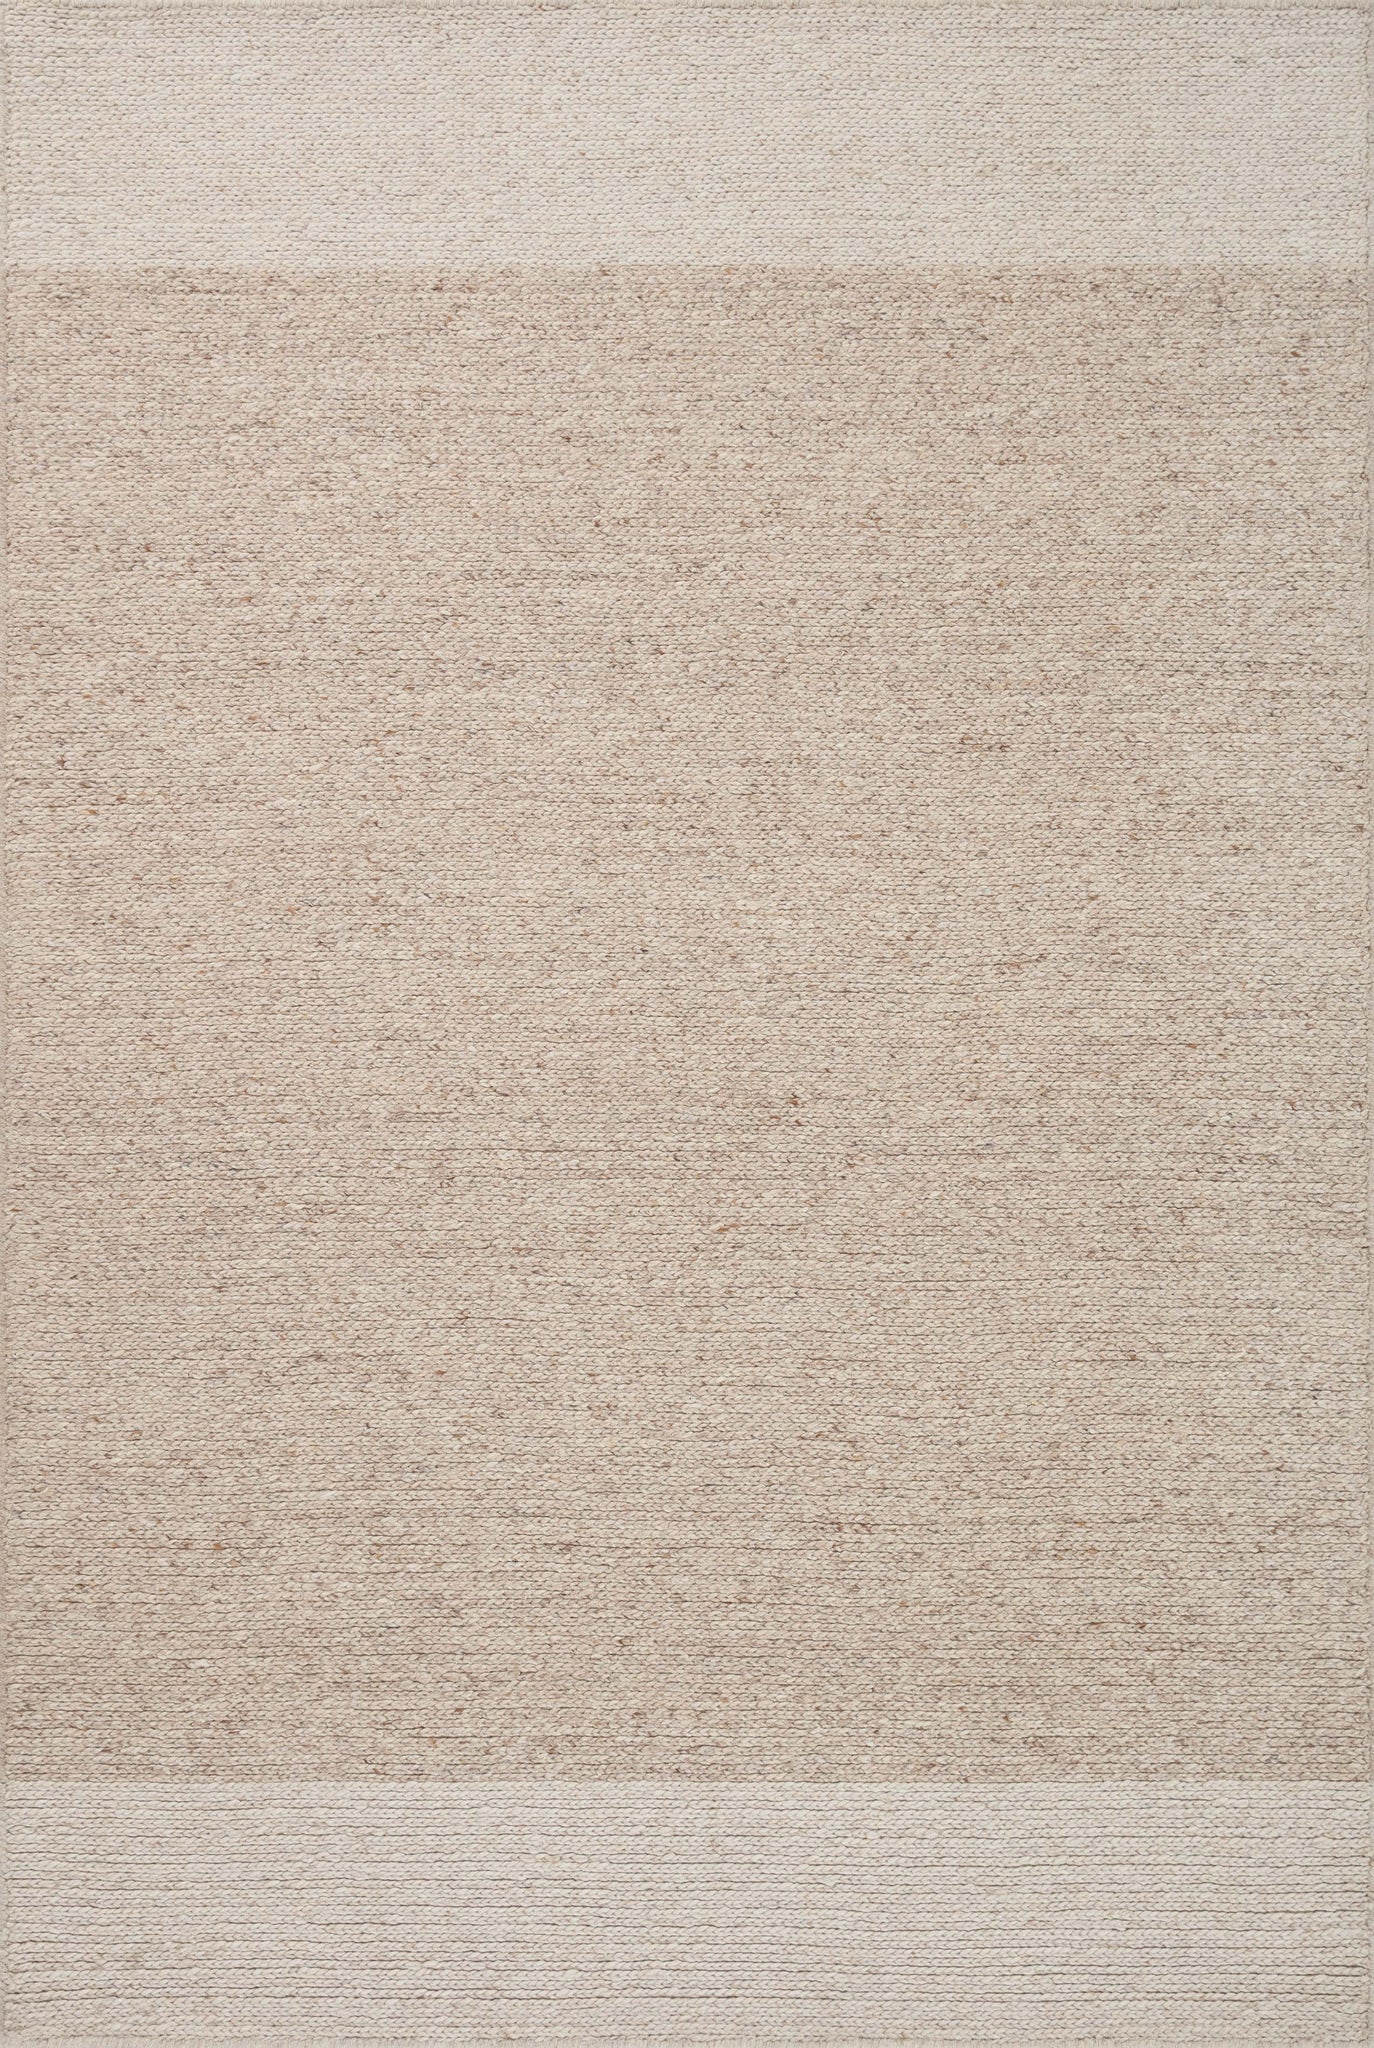 Loloi Ashby Rug Collection - Oatmeal / Natural - Magnolia Home by Joanna Gaines-Blue Hand Home